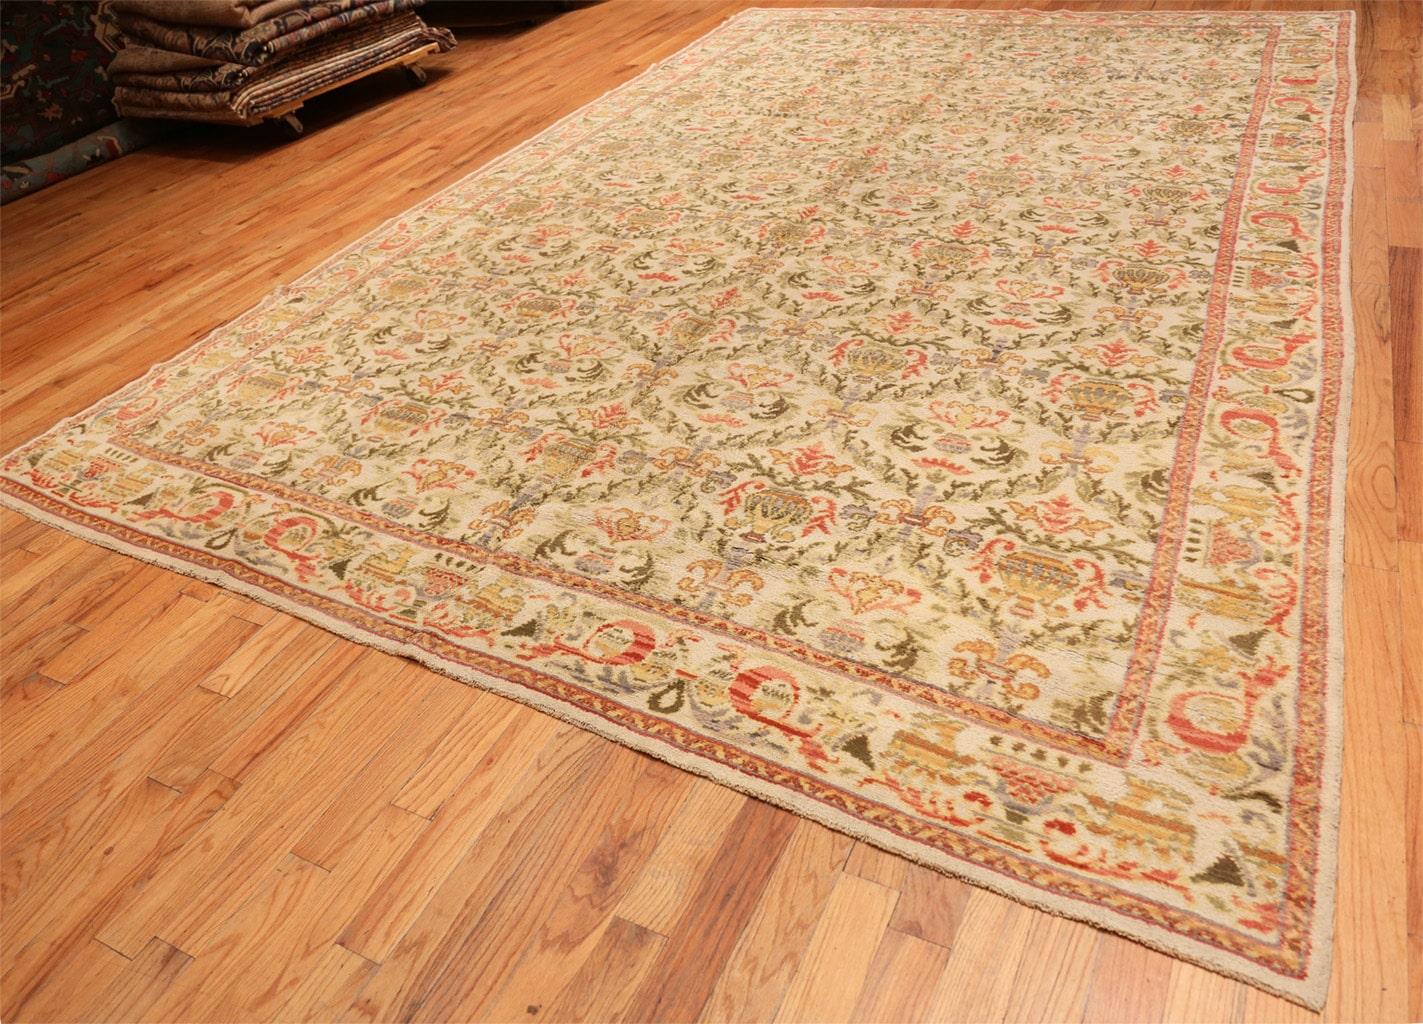 Spanish Colonial Antique Spanish Rug. Size: 9 ft 7 in x 15 ft 7 in For Sale